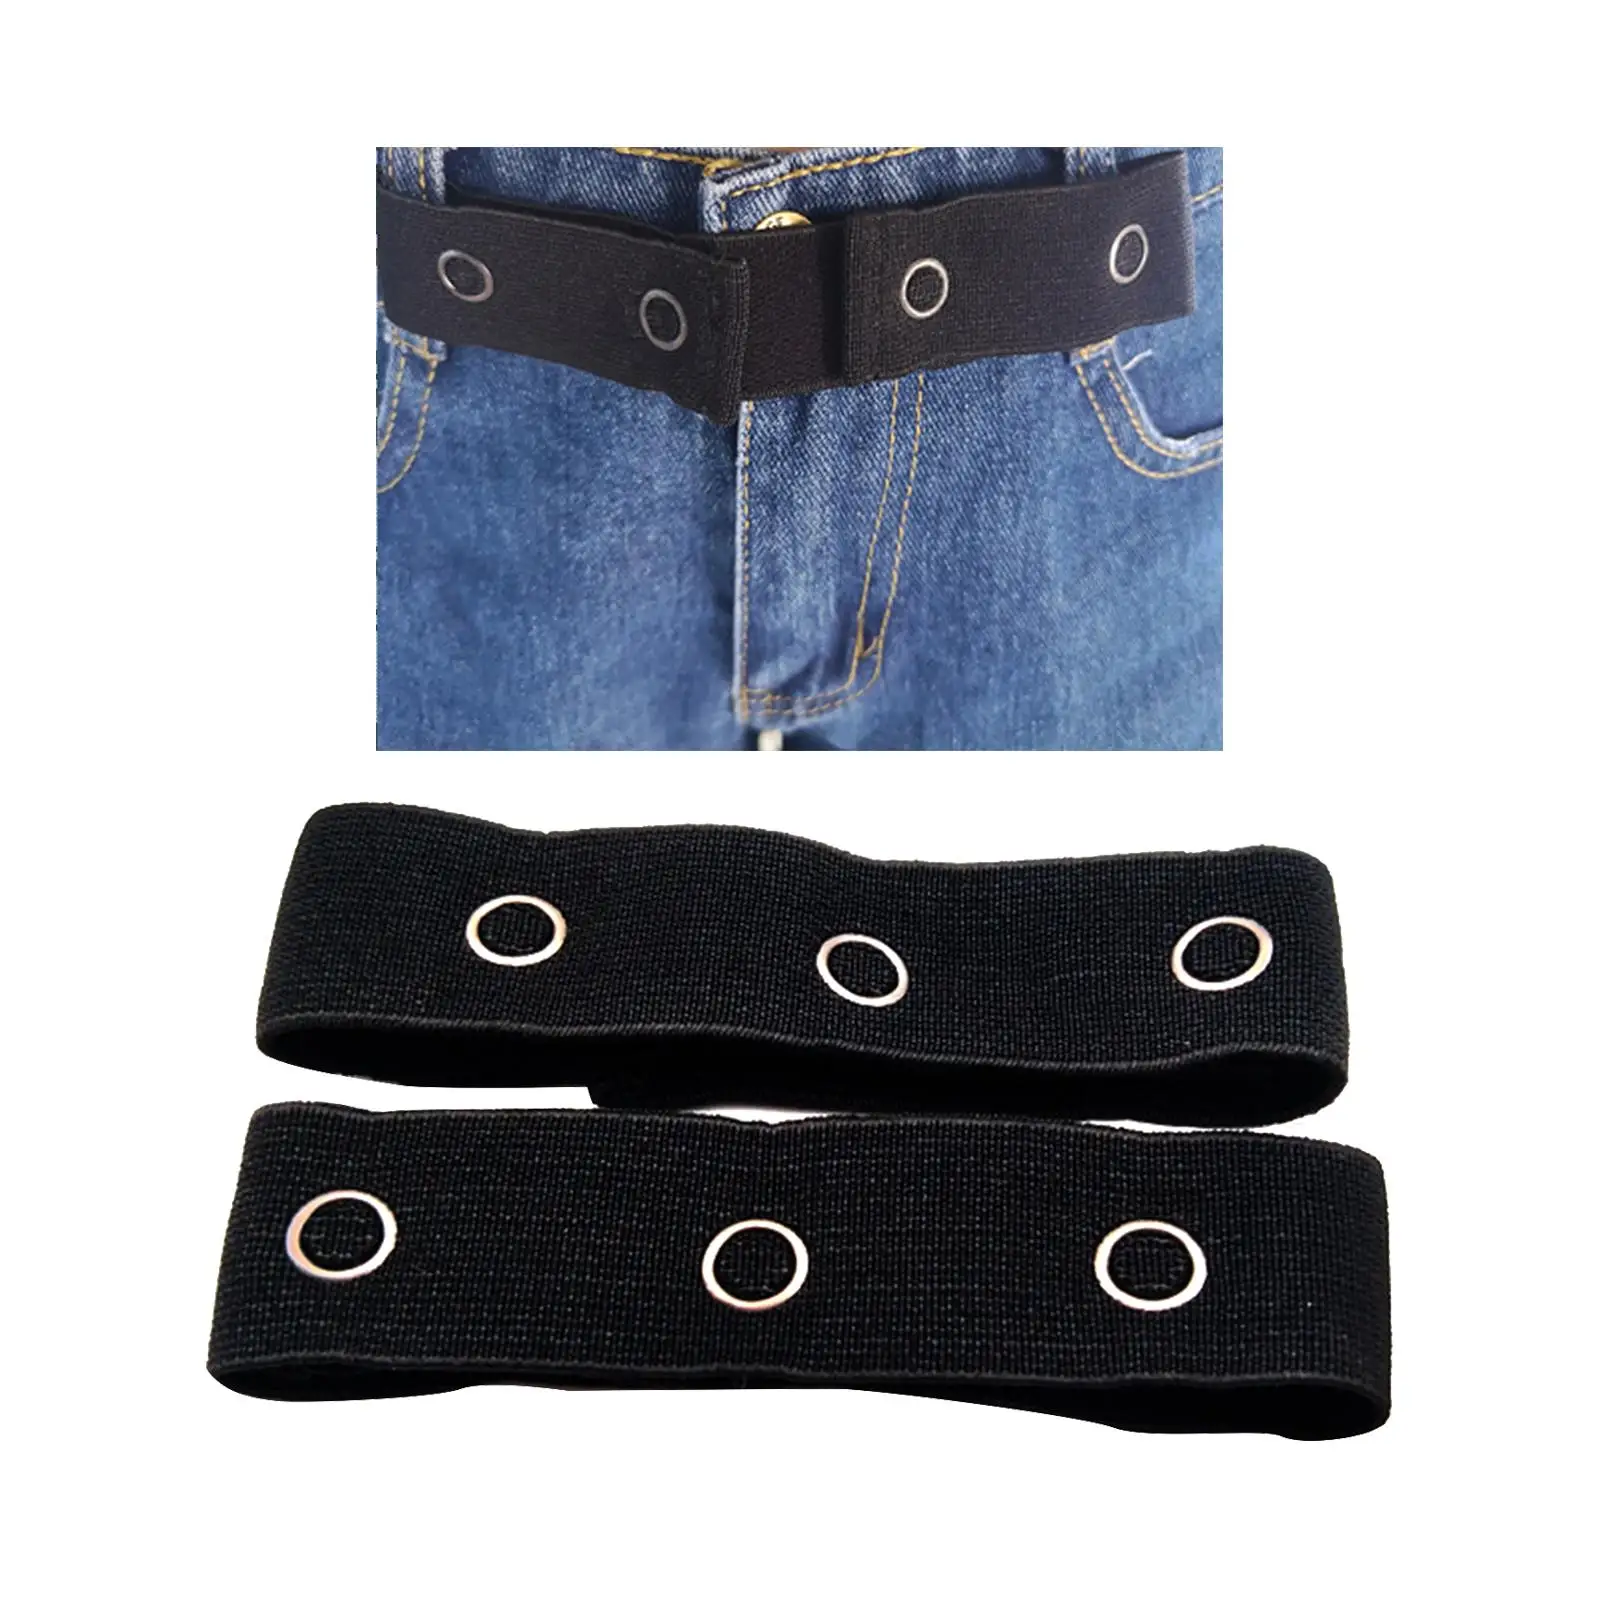 1 Pair Pants Button Extenders Spare Adjustable Multifunctional Easy to Use Elastic Portable Waistband Extenders for Pants Jeans